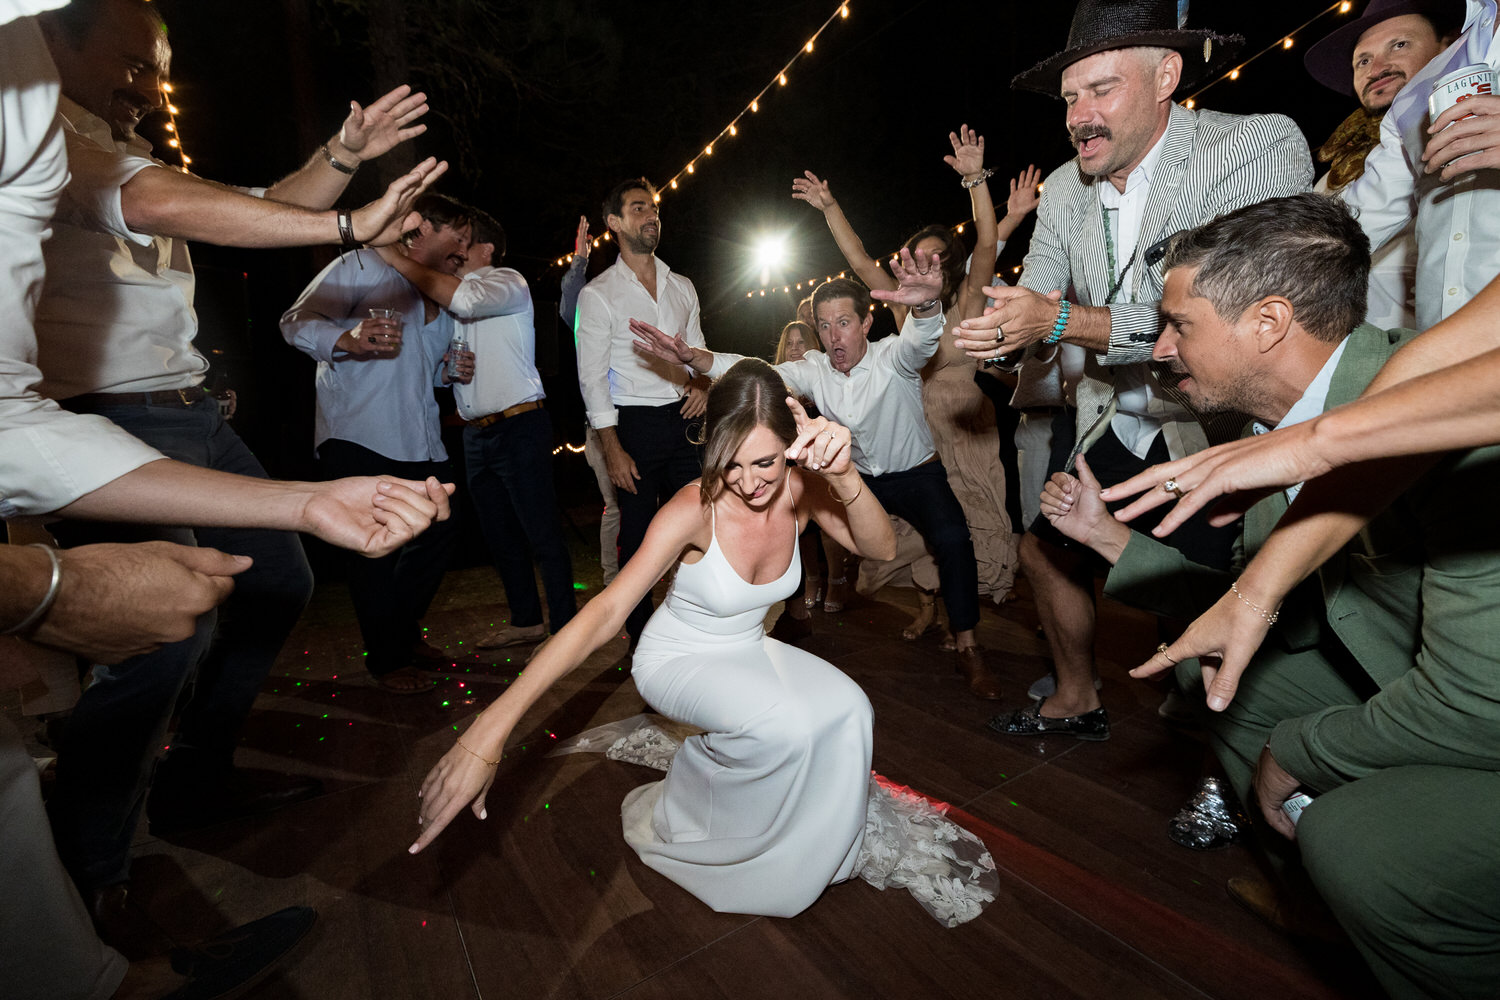 Shimmying low and close to the floor, wedding guests dance and get their groove on during a reception party in Graeagle, California.